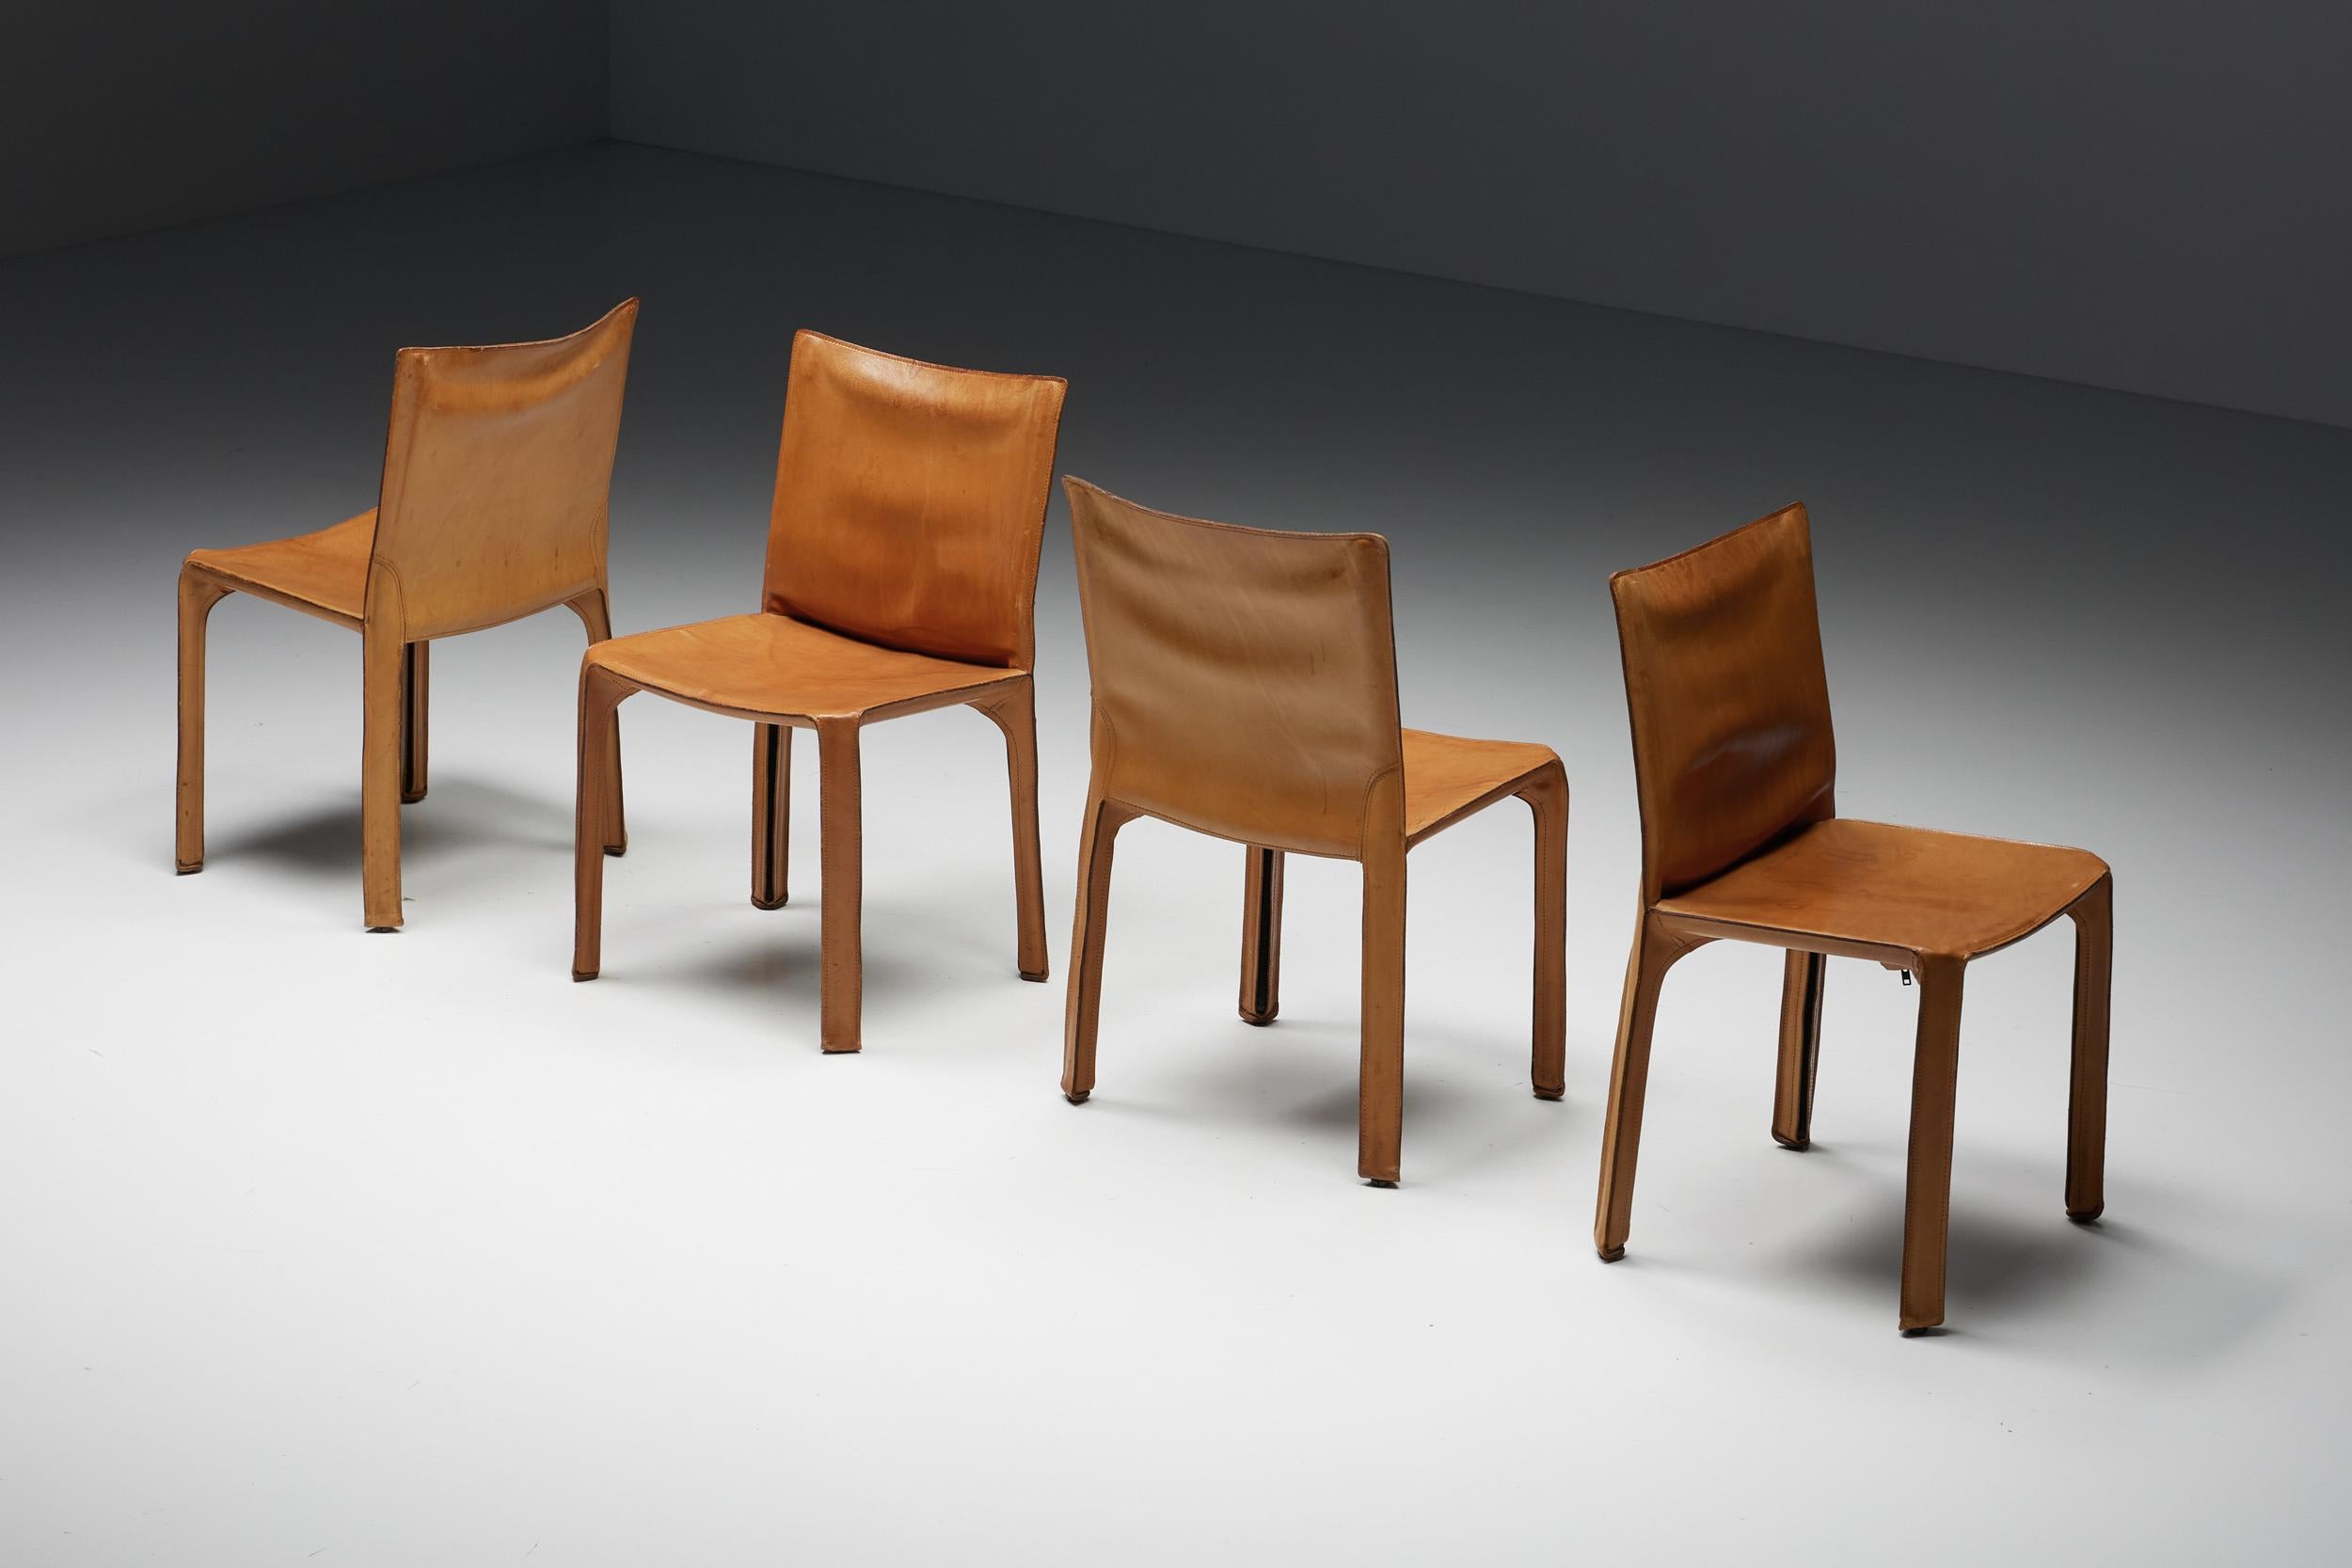 Mario Bellini; Cassina; Mid-Century Modern; Italian design; 1970's Italy; steel; cognac leather; 

CAB-412 dining room chairs in cognac leather designed by Mario Bellini and manufactured by Cassina in the 1970s in Italy. The leather cover is